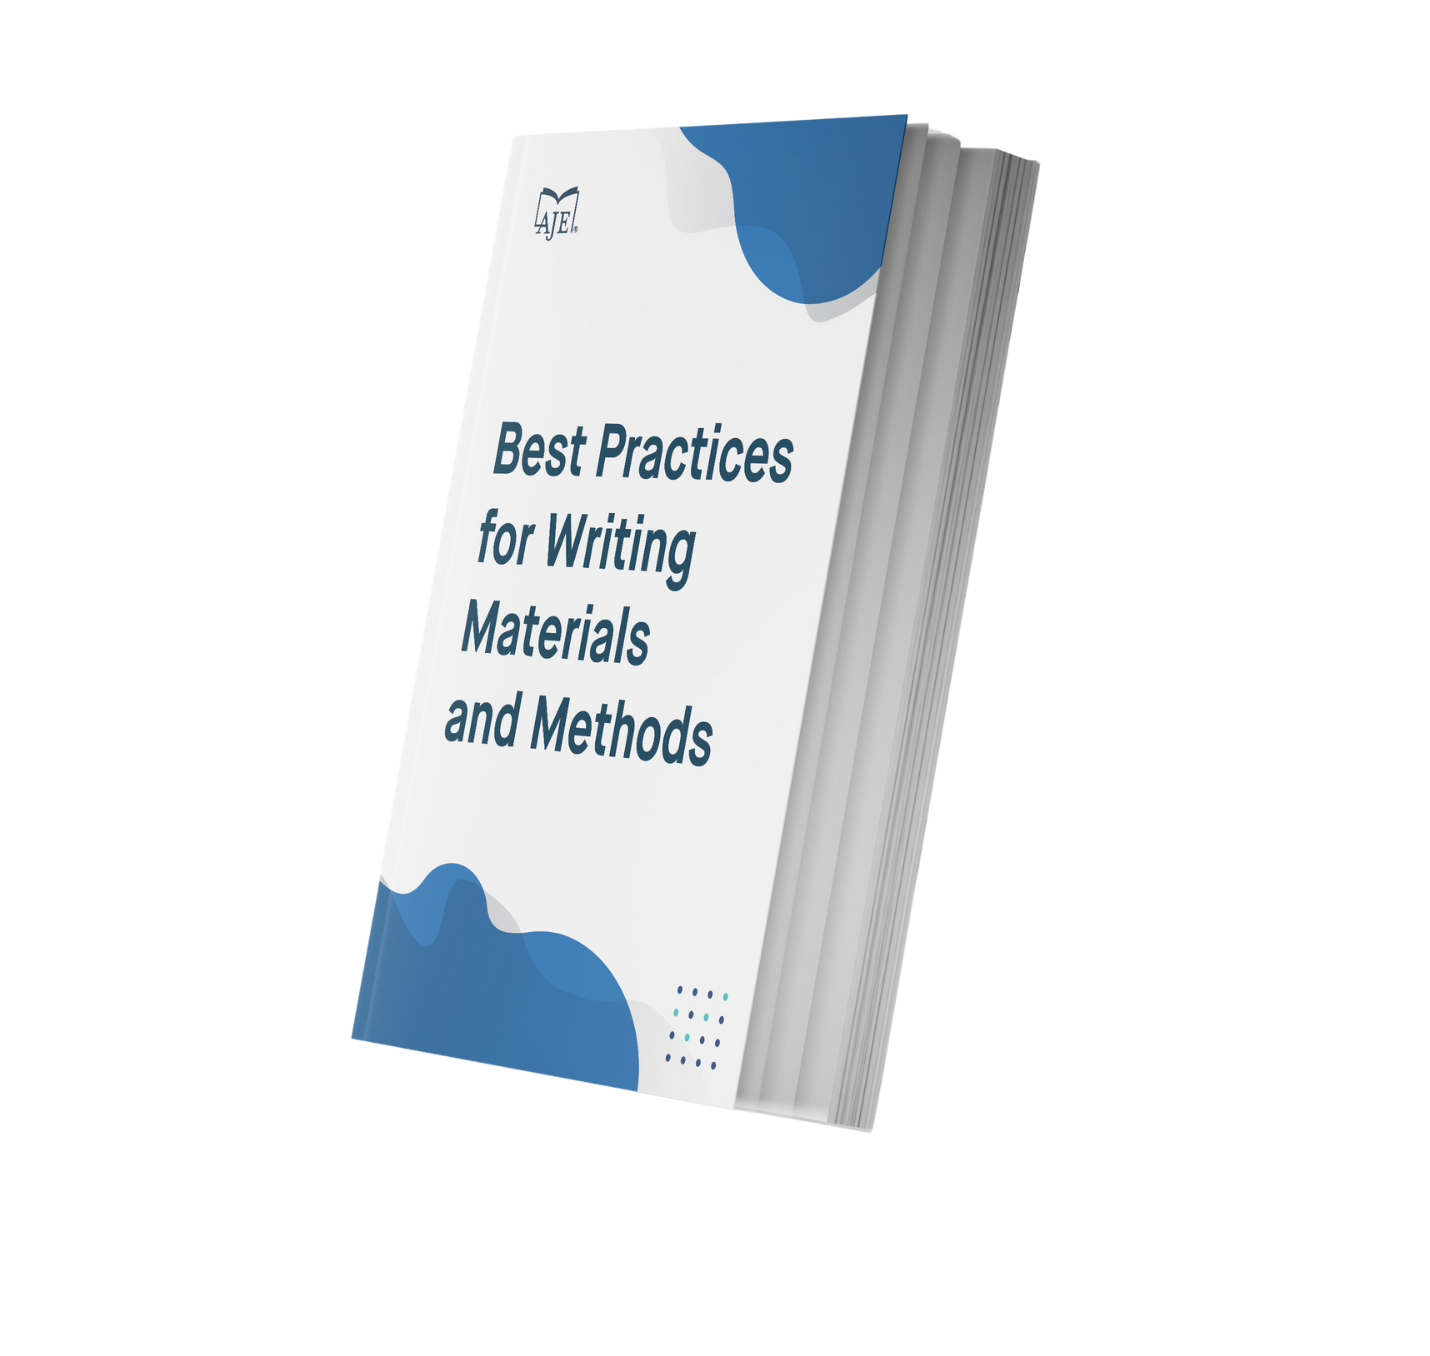 Best Practices for Writing Materials and Methods - no shadow